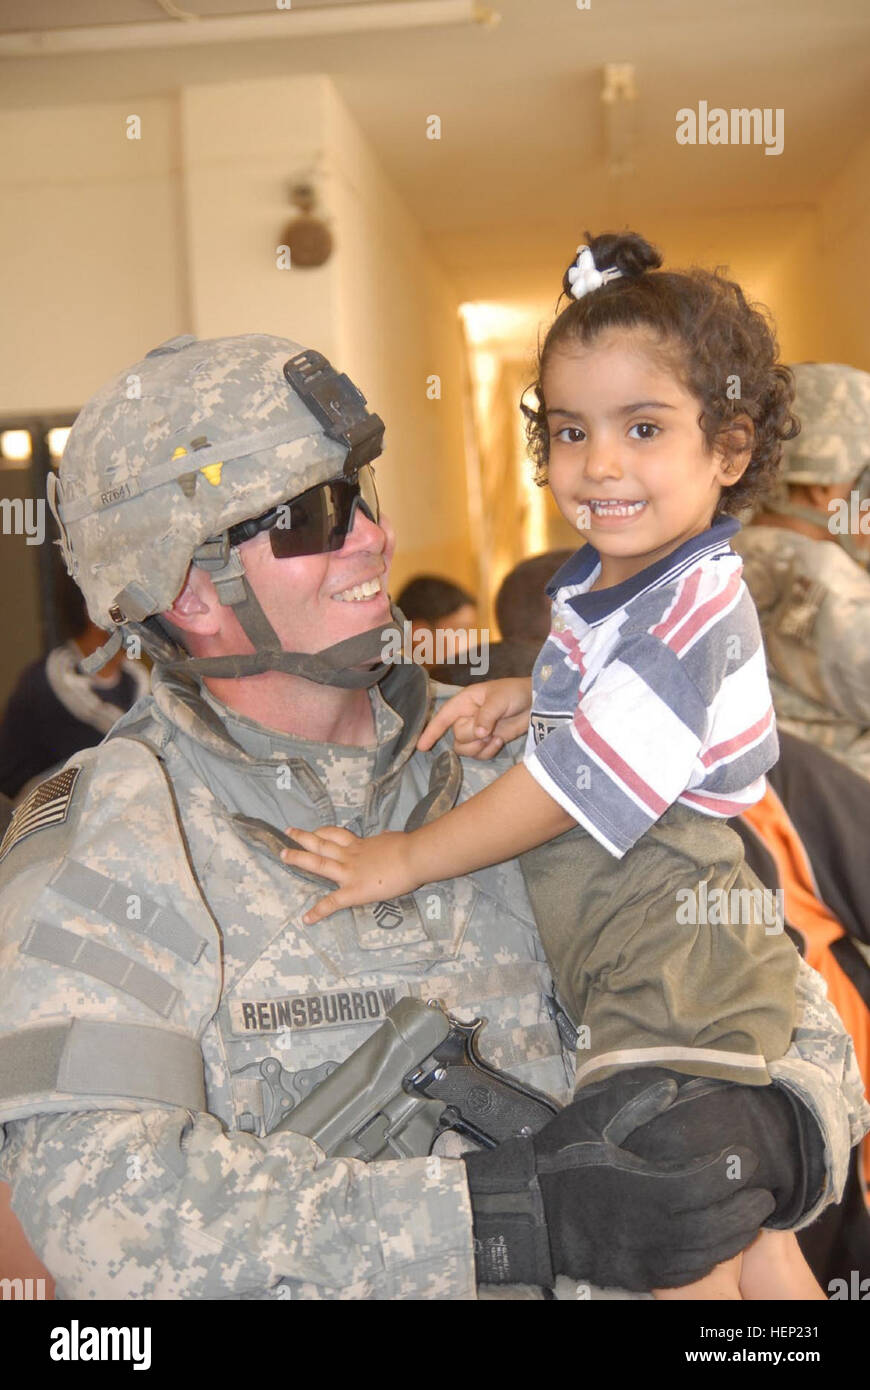 Staff Sgt. Joseph Reinsburrow, 64th Military Police Company and native of Towanda, Pa., holds an Iraqi child on June 12 in Hurriyah, while Iraqi police and coalition forces hand out toys and school supplies to the local children. The 64th MP Co., is deployed from Fort Hood, Texas, and is currently assigned to the 716th MP Battalion, 18th MP Bde., MND-B. IP making difference in local Baghdad community 94492 Stock Photo